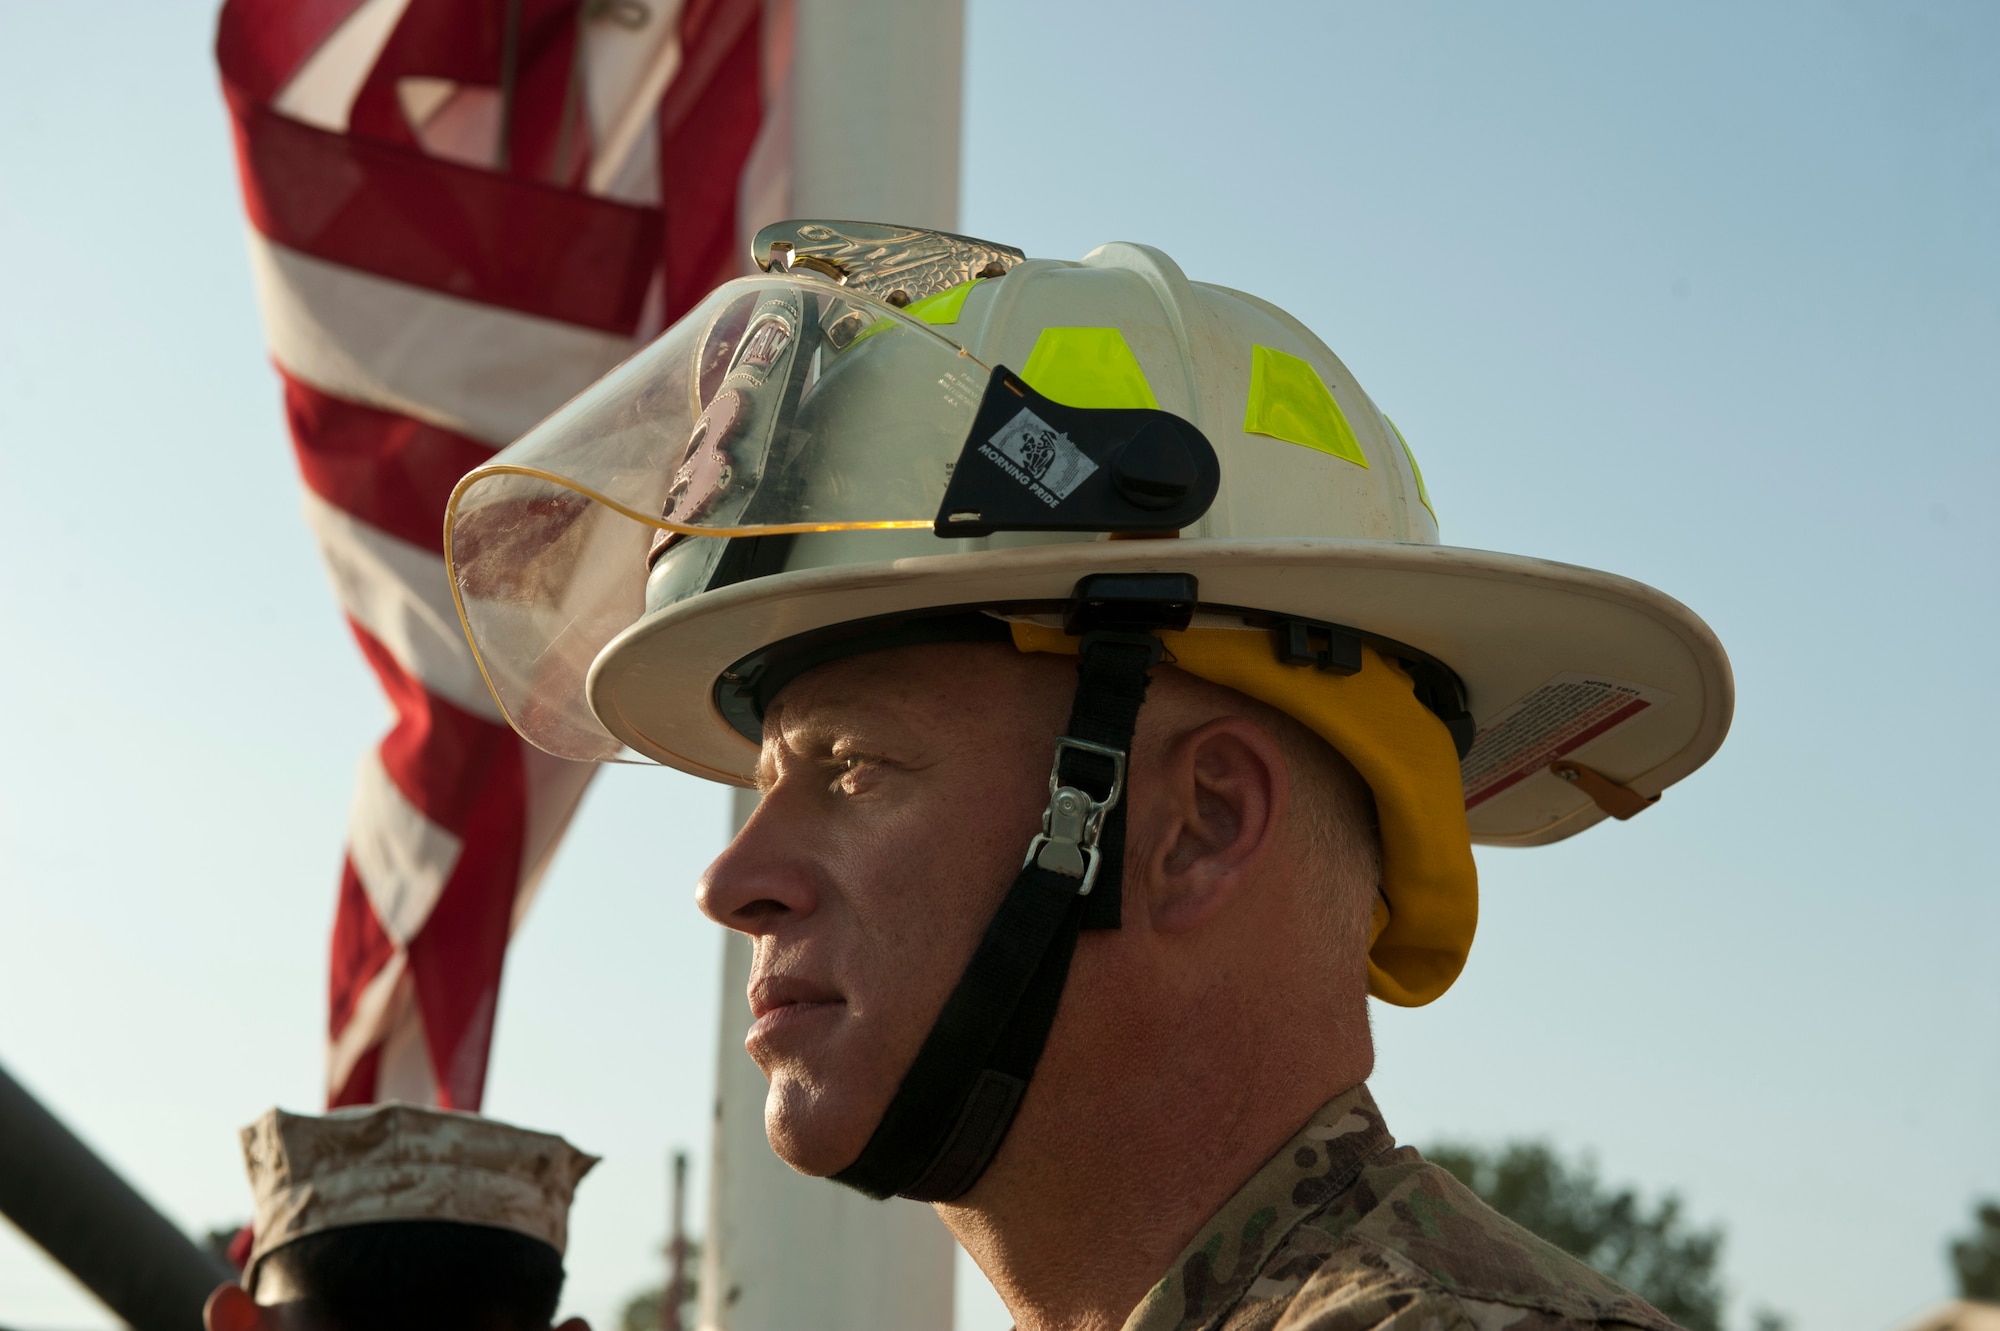 A firefighter with the Bagram fire department waits to begin a 9/11 remembrance ceremony, Bagram Airfield, Afghanistan, Sept. 11, 2016. Servicemembers and civilians from across Bagram gathered to remember the events of Sept. 11, 2001. (U.S. Air Force photo by Capt. Korey Fratini)